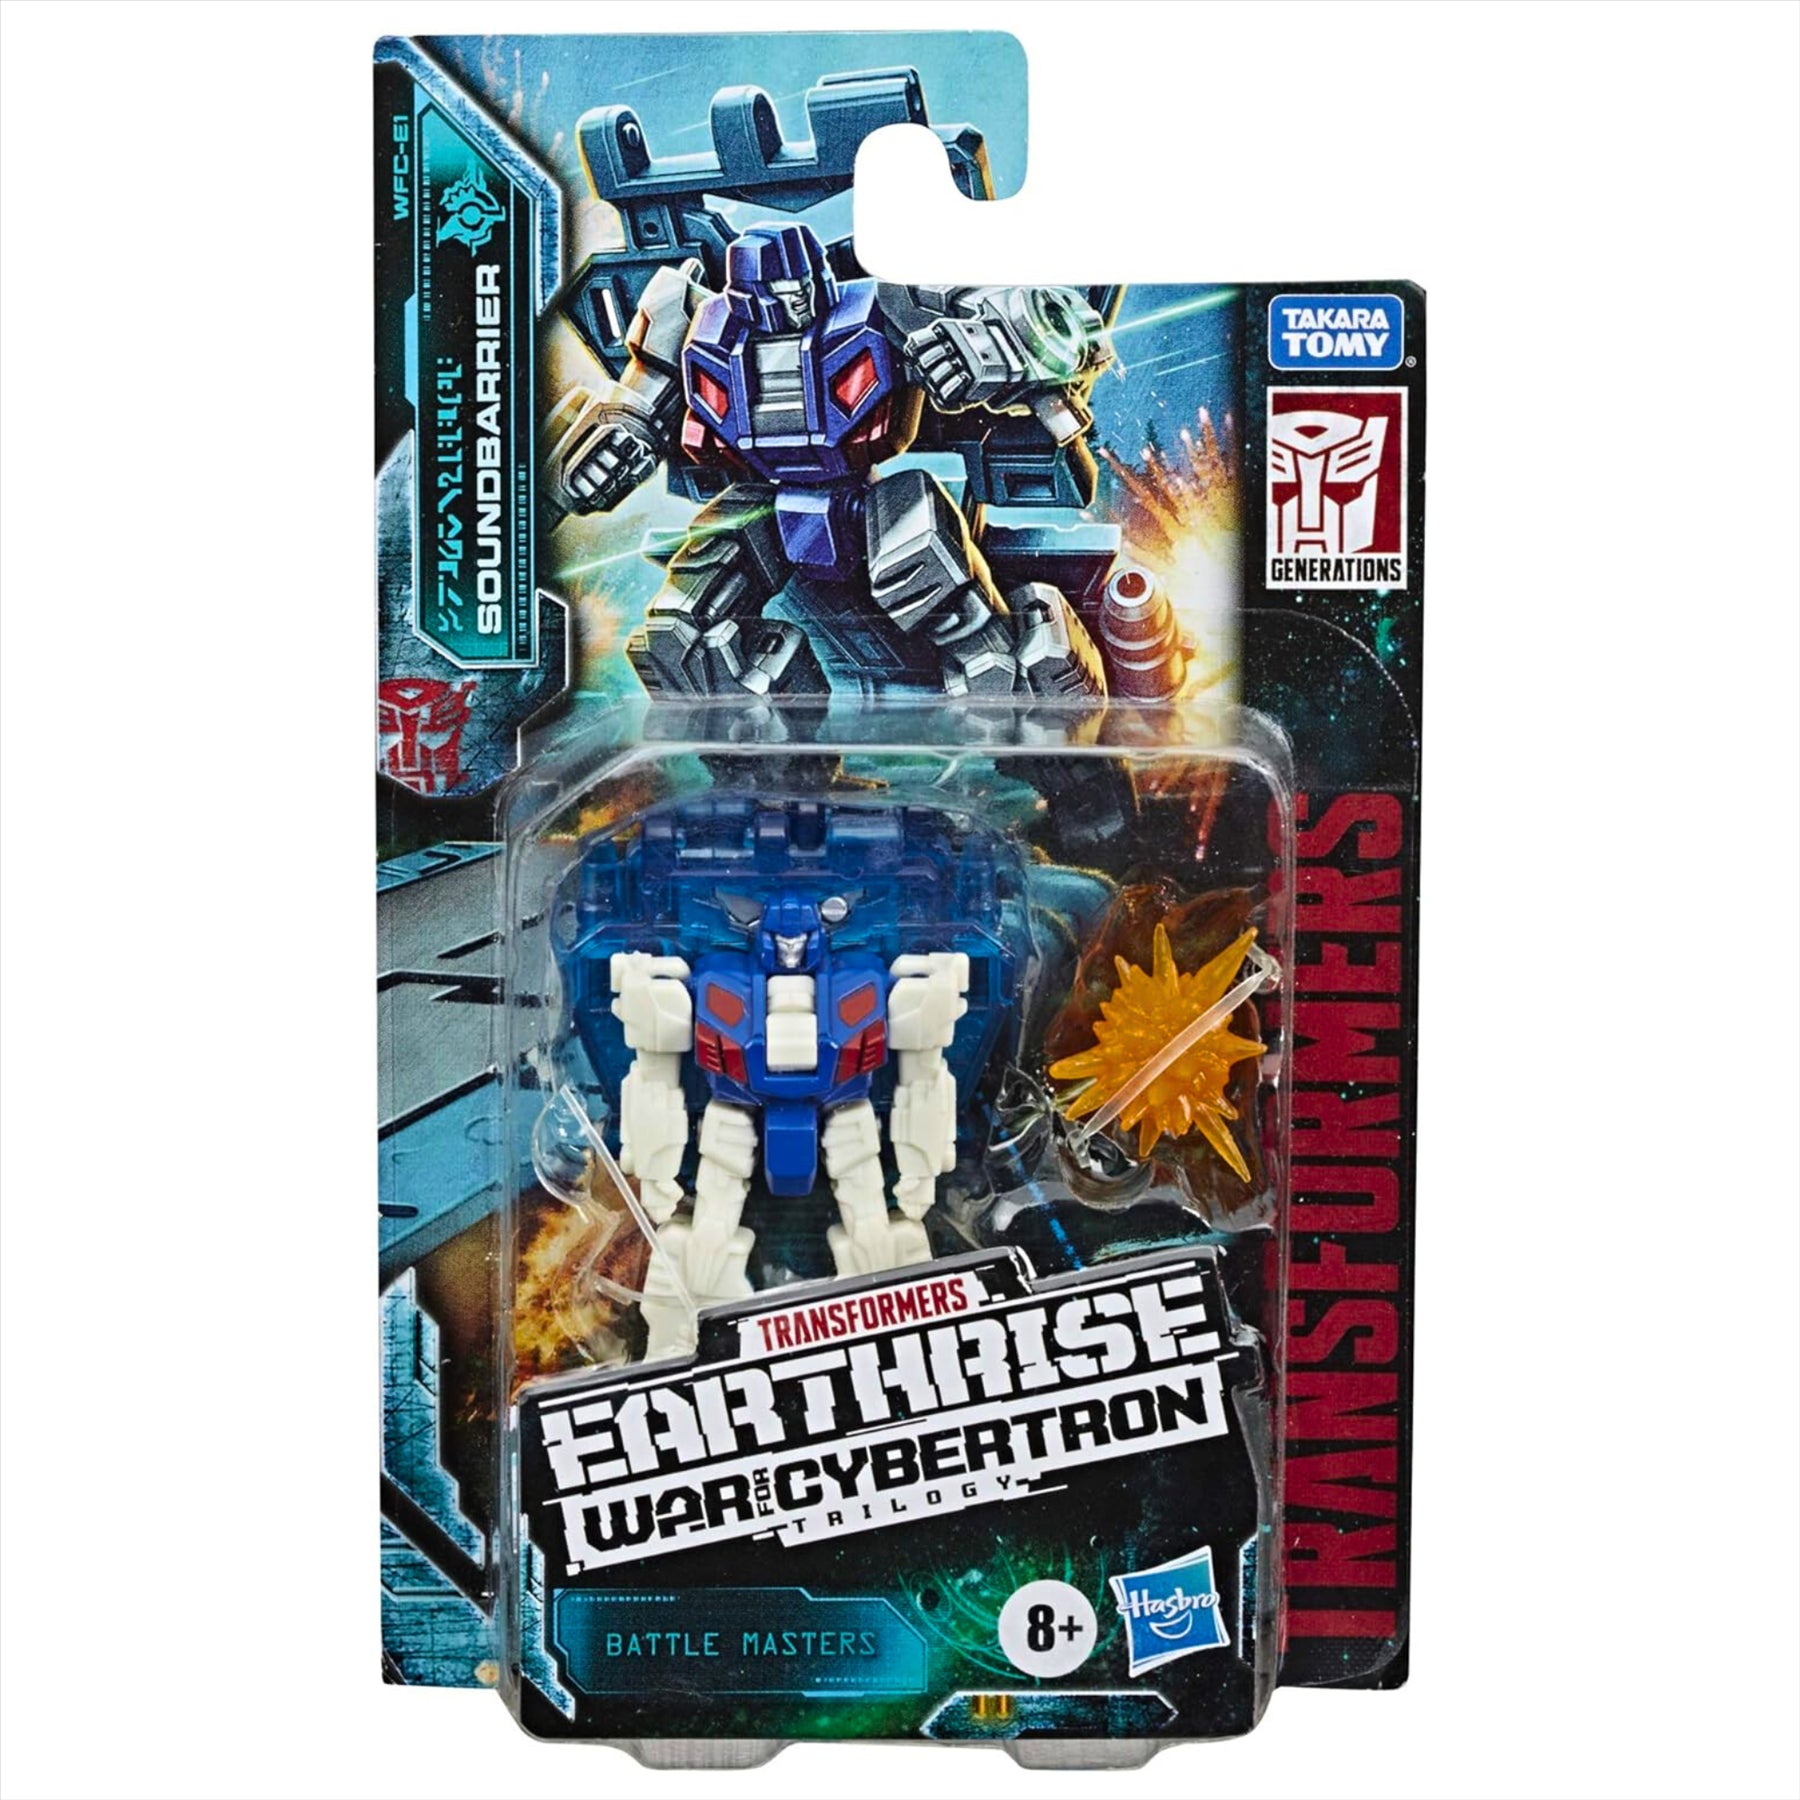 Transformers Earthrise War for Cybertron Soundbarrier 6cm Articulated Action Figure Toy with Accessory - Toptoys2u